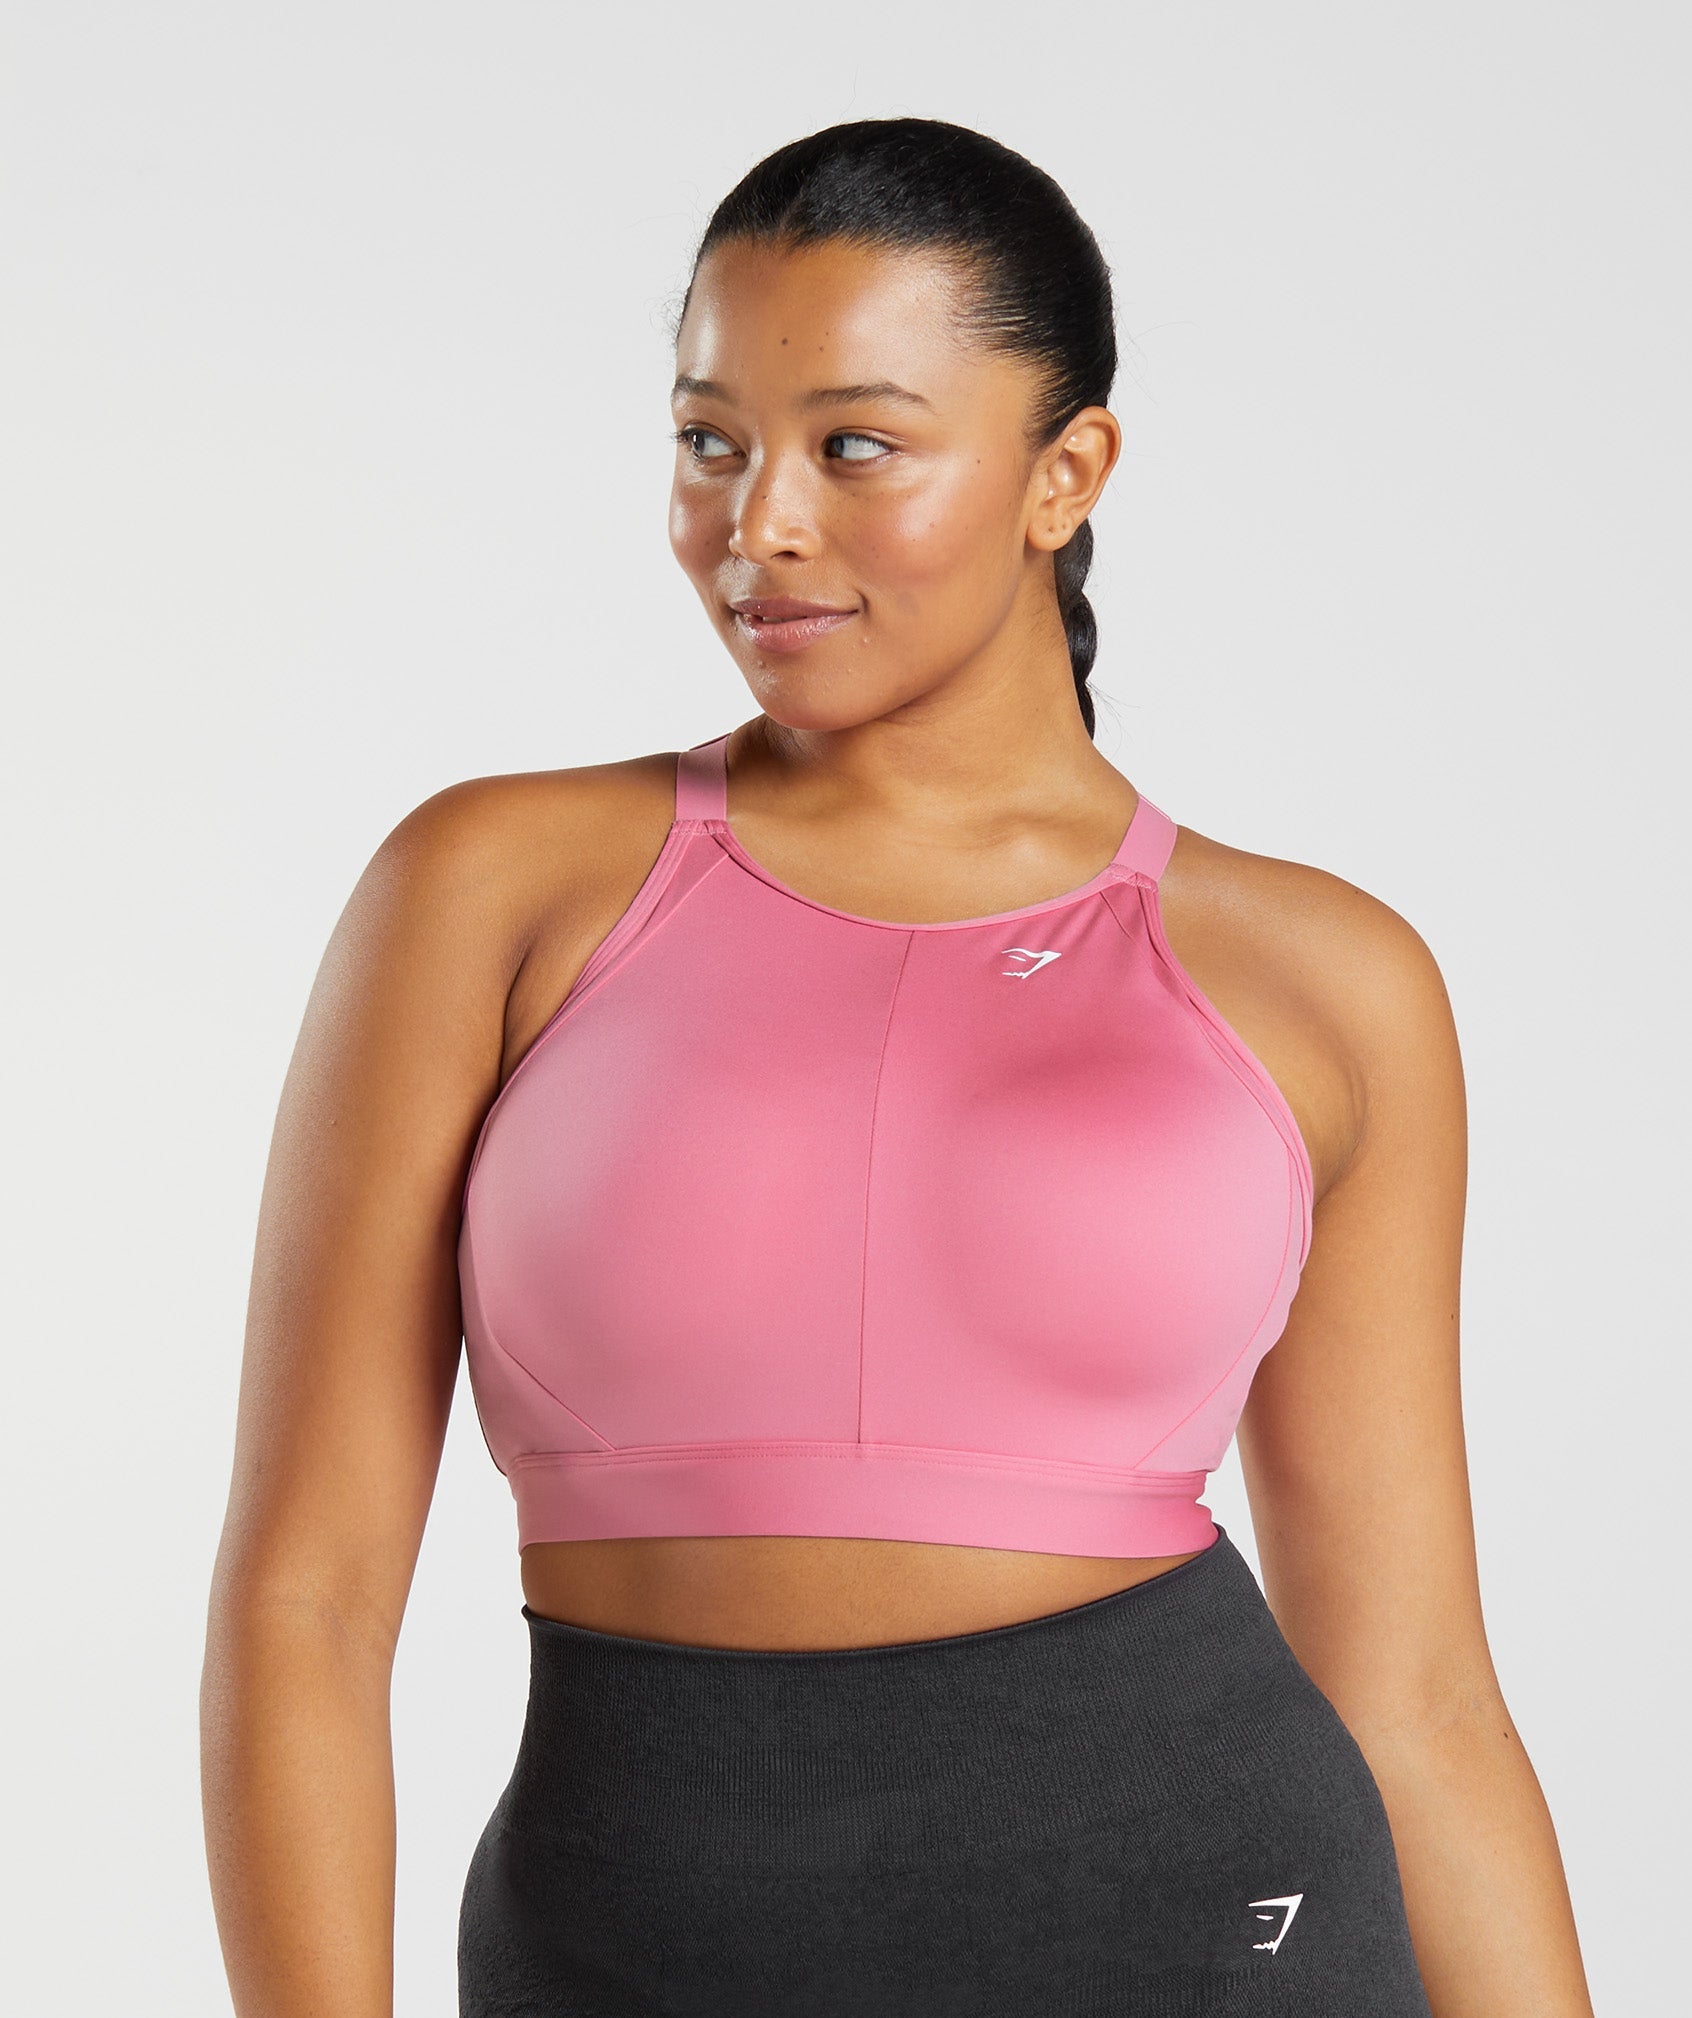 VAI21 2 pack sports bras in pink - part of a set